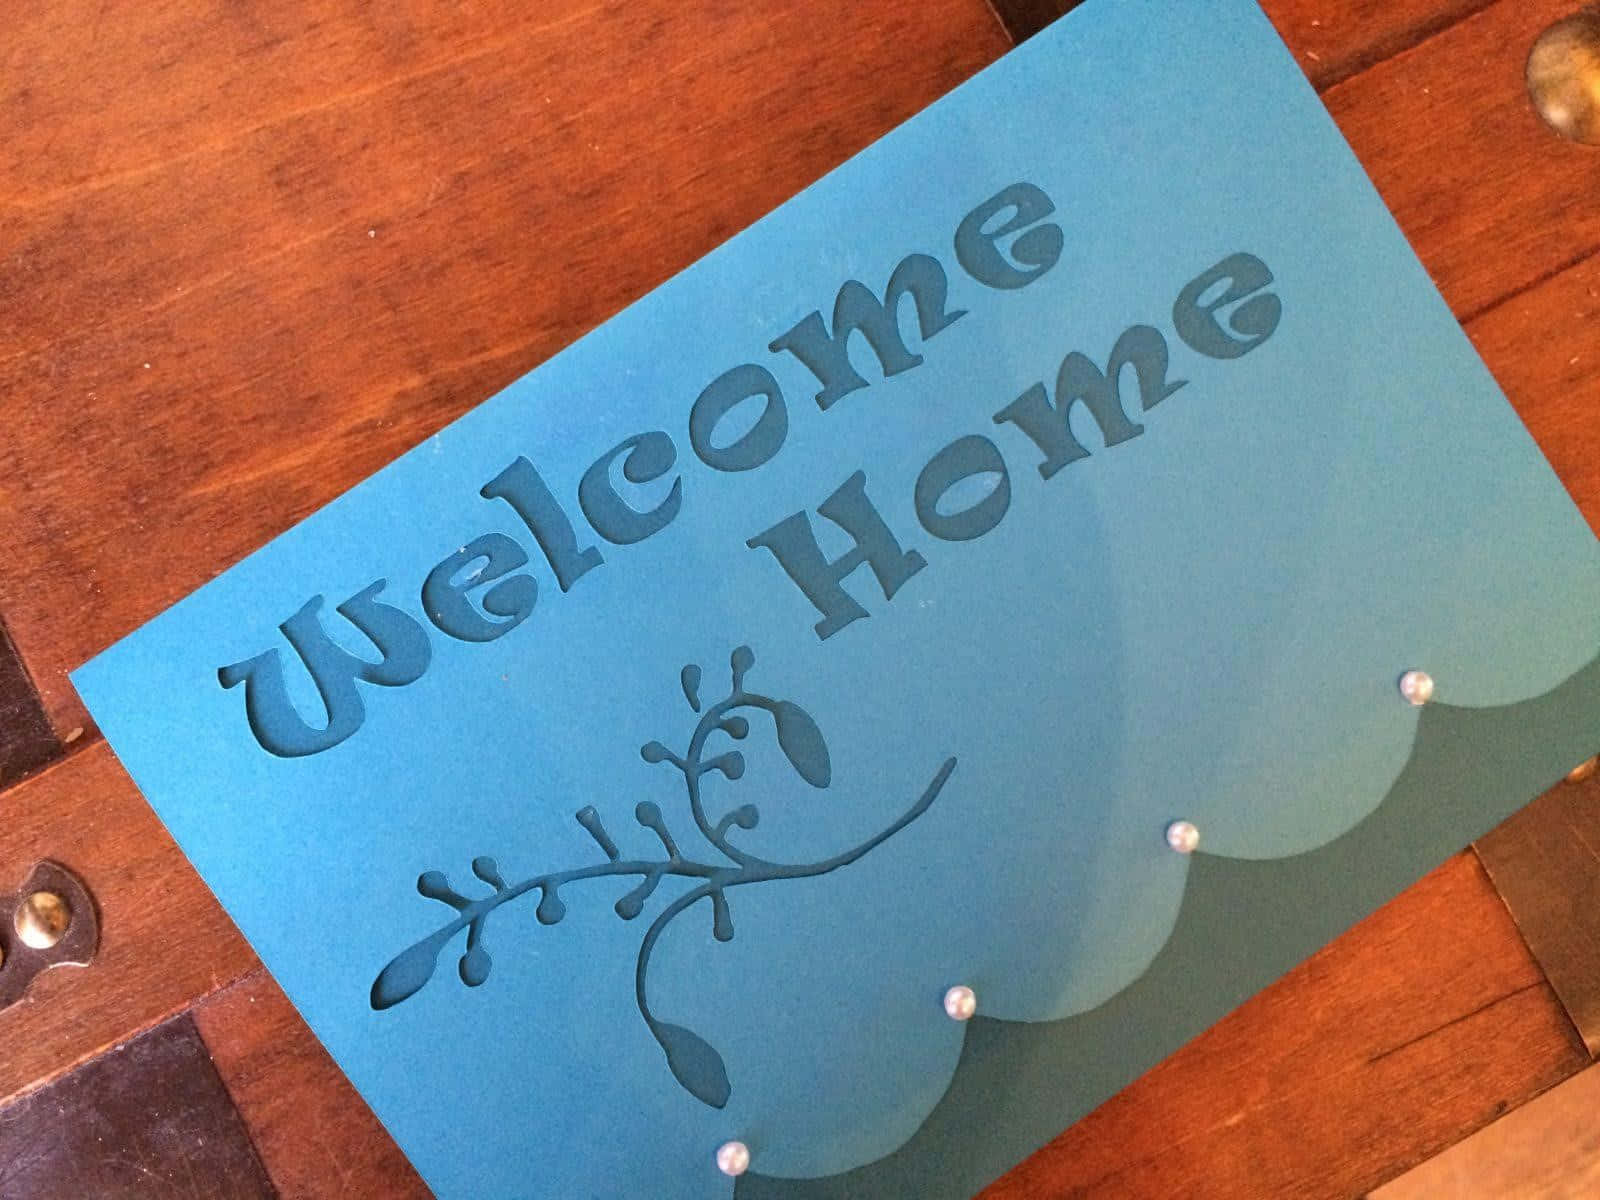 Welcome Home Signon Wooden Table Wallpaper